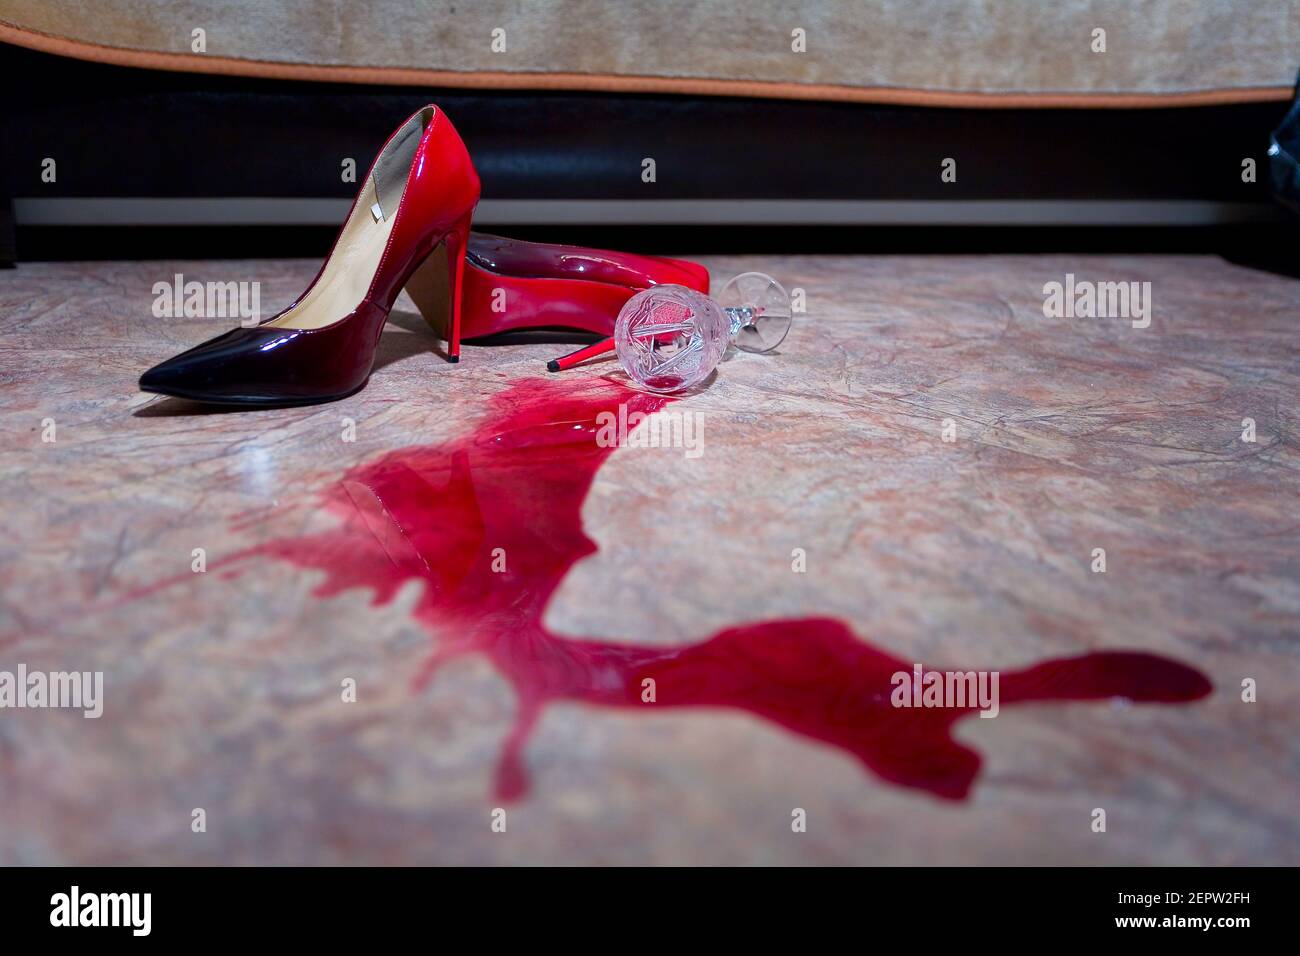 A spilled glass of wine and women's shoes on the floor. Still life. Stock Photo